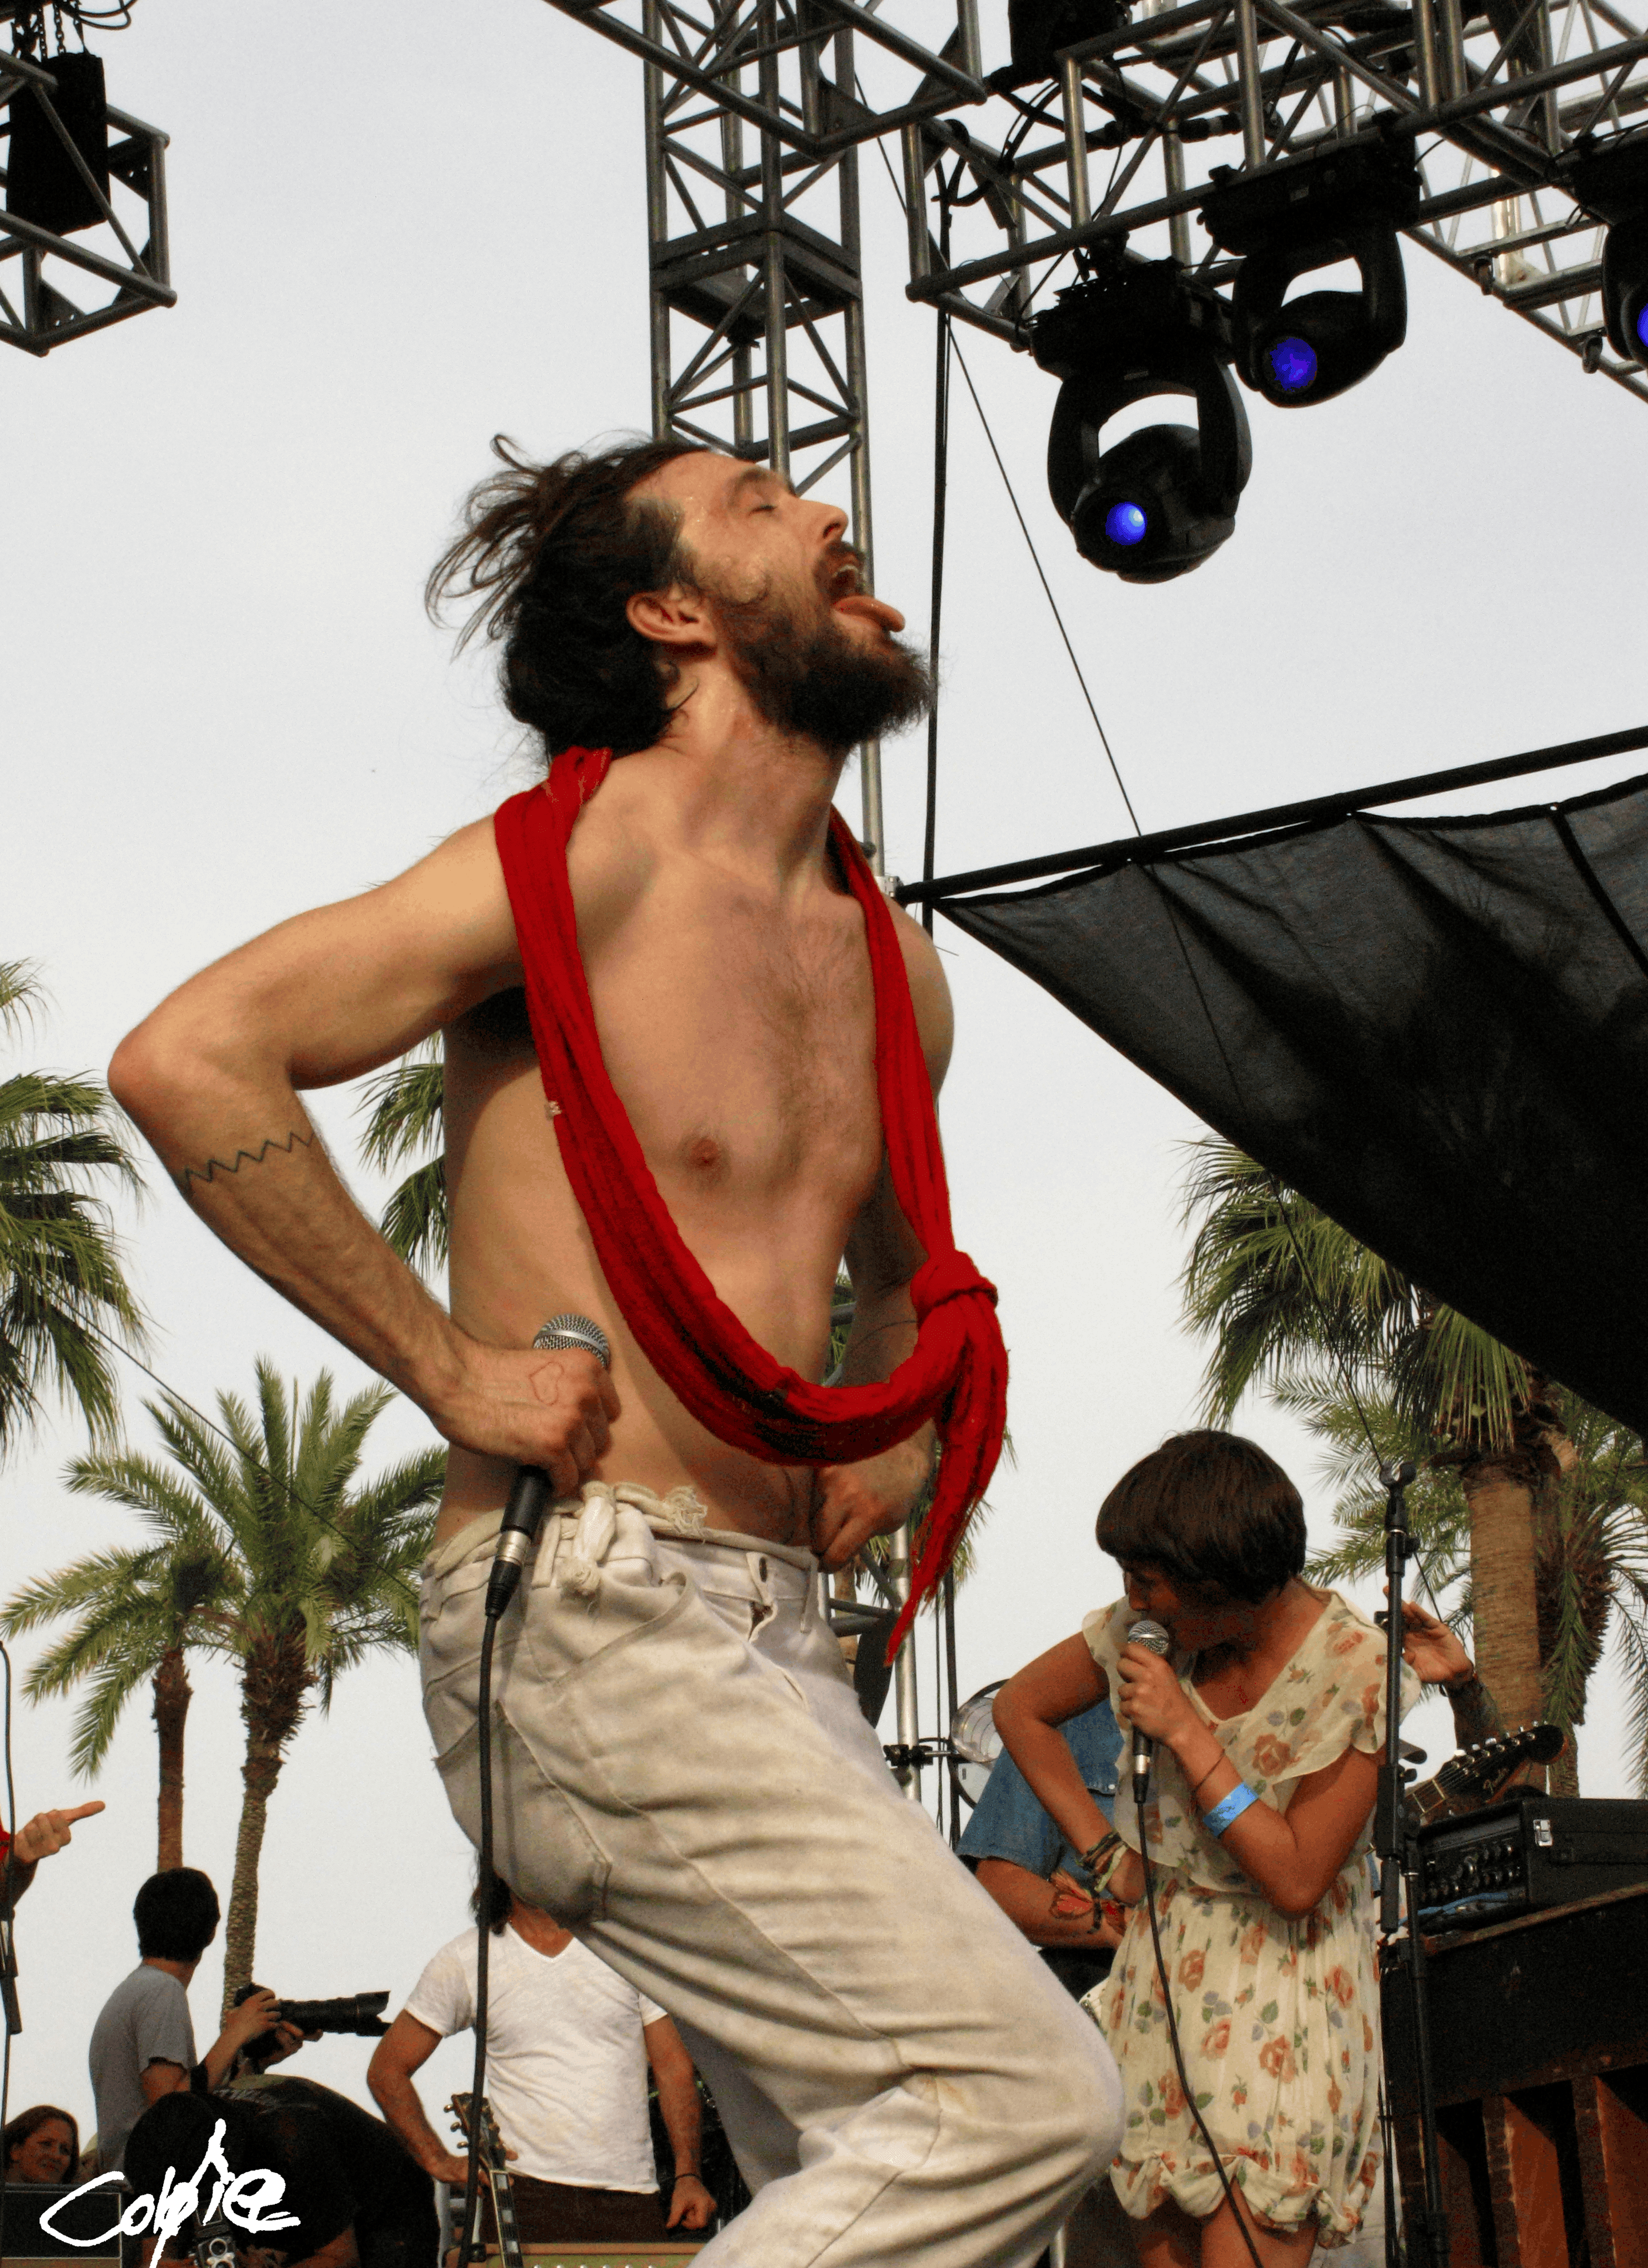 Edward Sharpe and the Magnetic Zeros - 2010